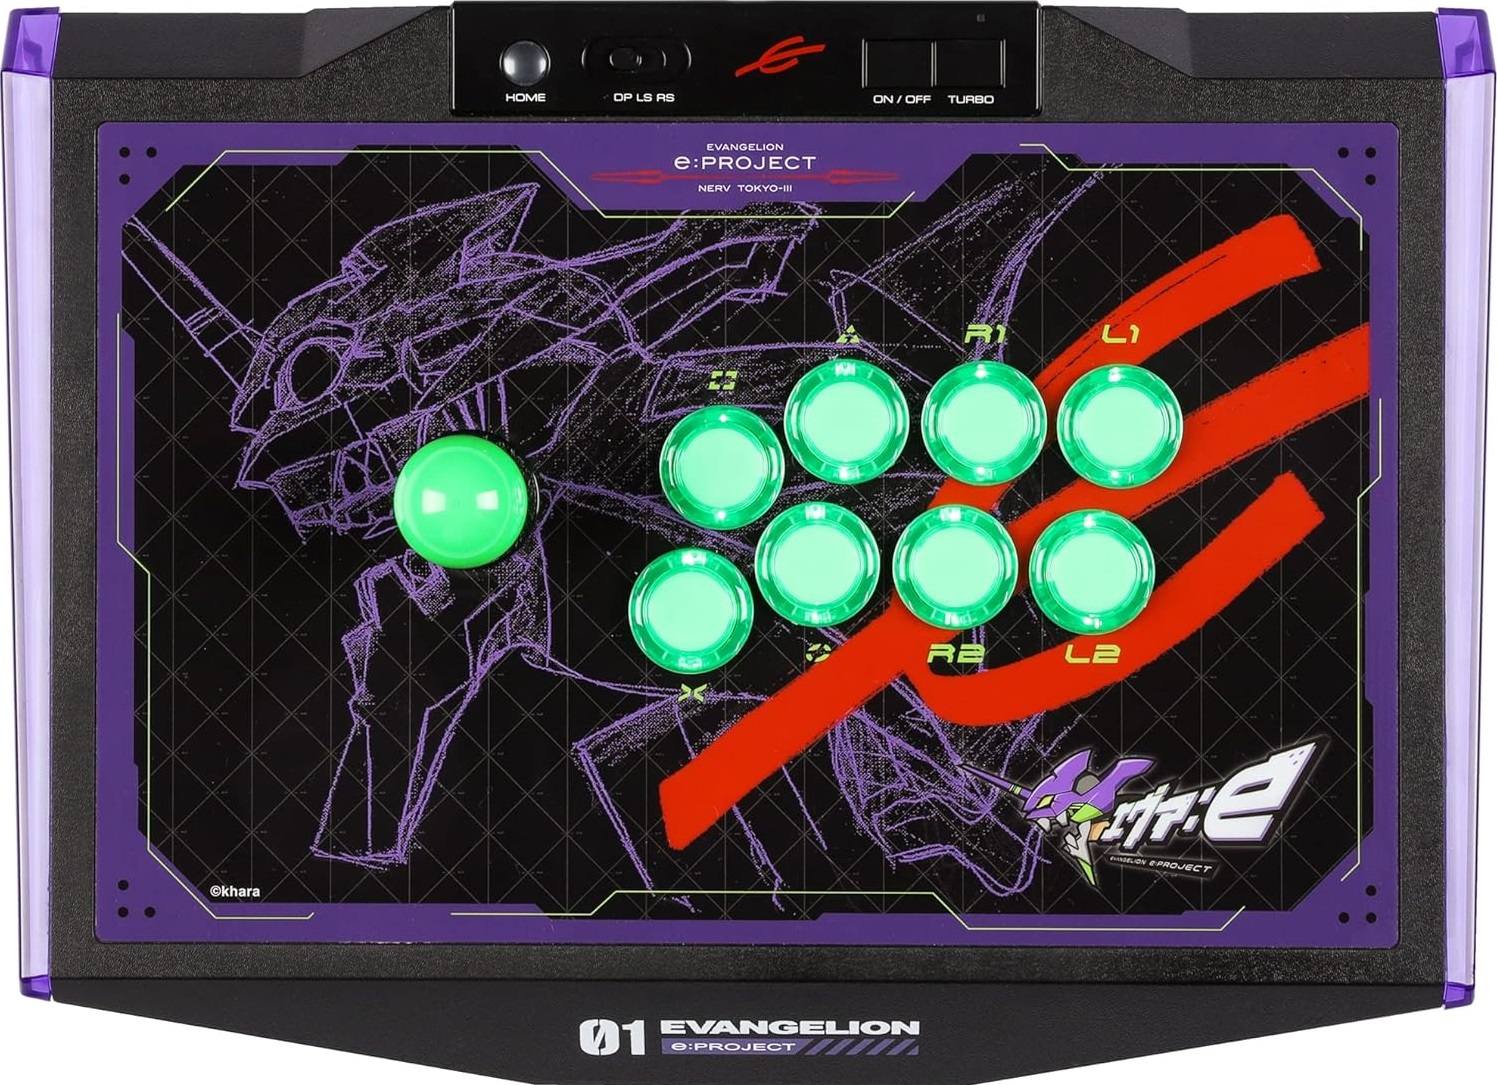 Read more about the article Evangelion e:Project Arcade Controller Review